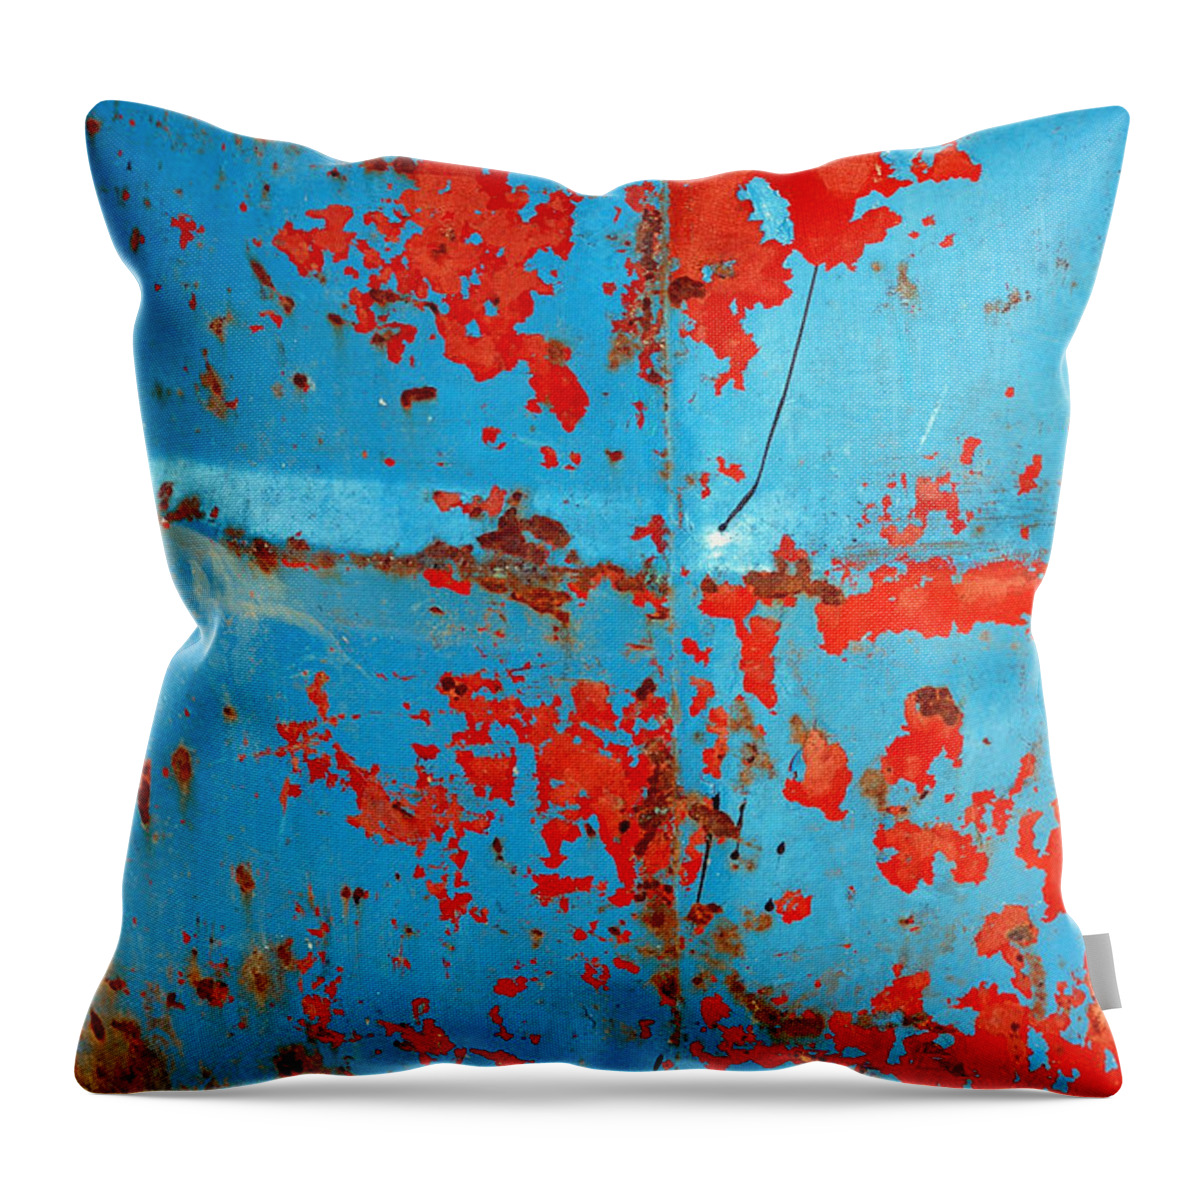 Metallic Throw Pillow featuring the photograph Abstrac Texture Of The Paint Peeling Iron Drum by Antoni Halim